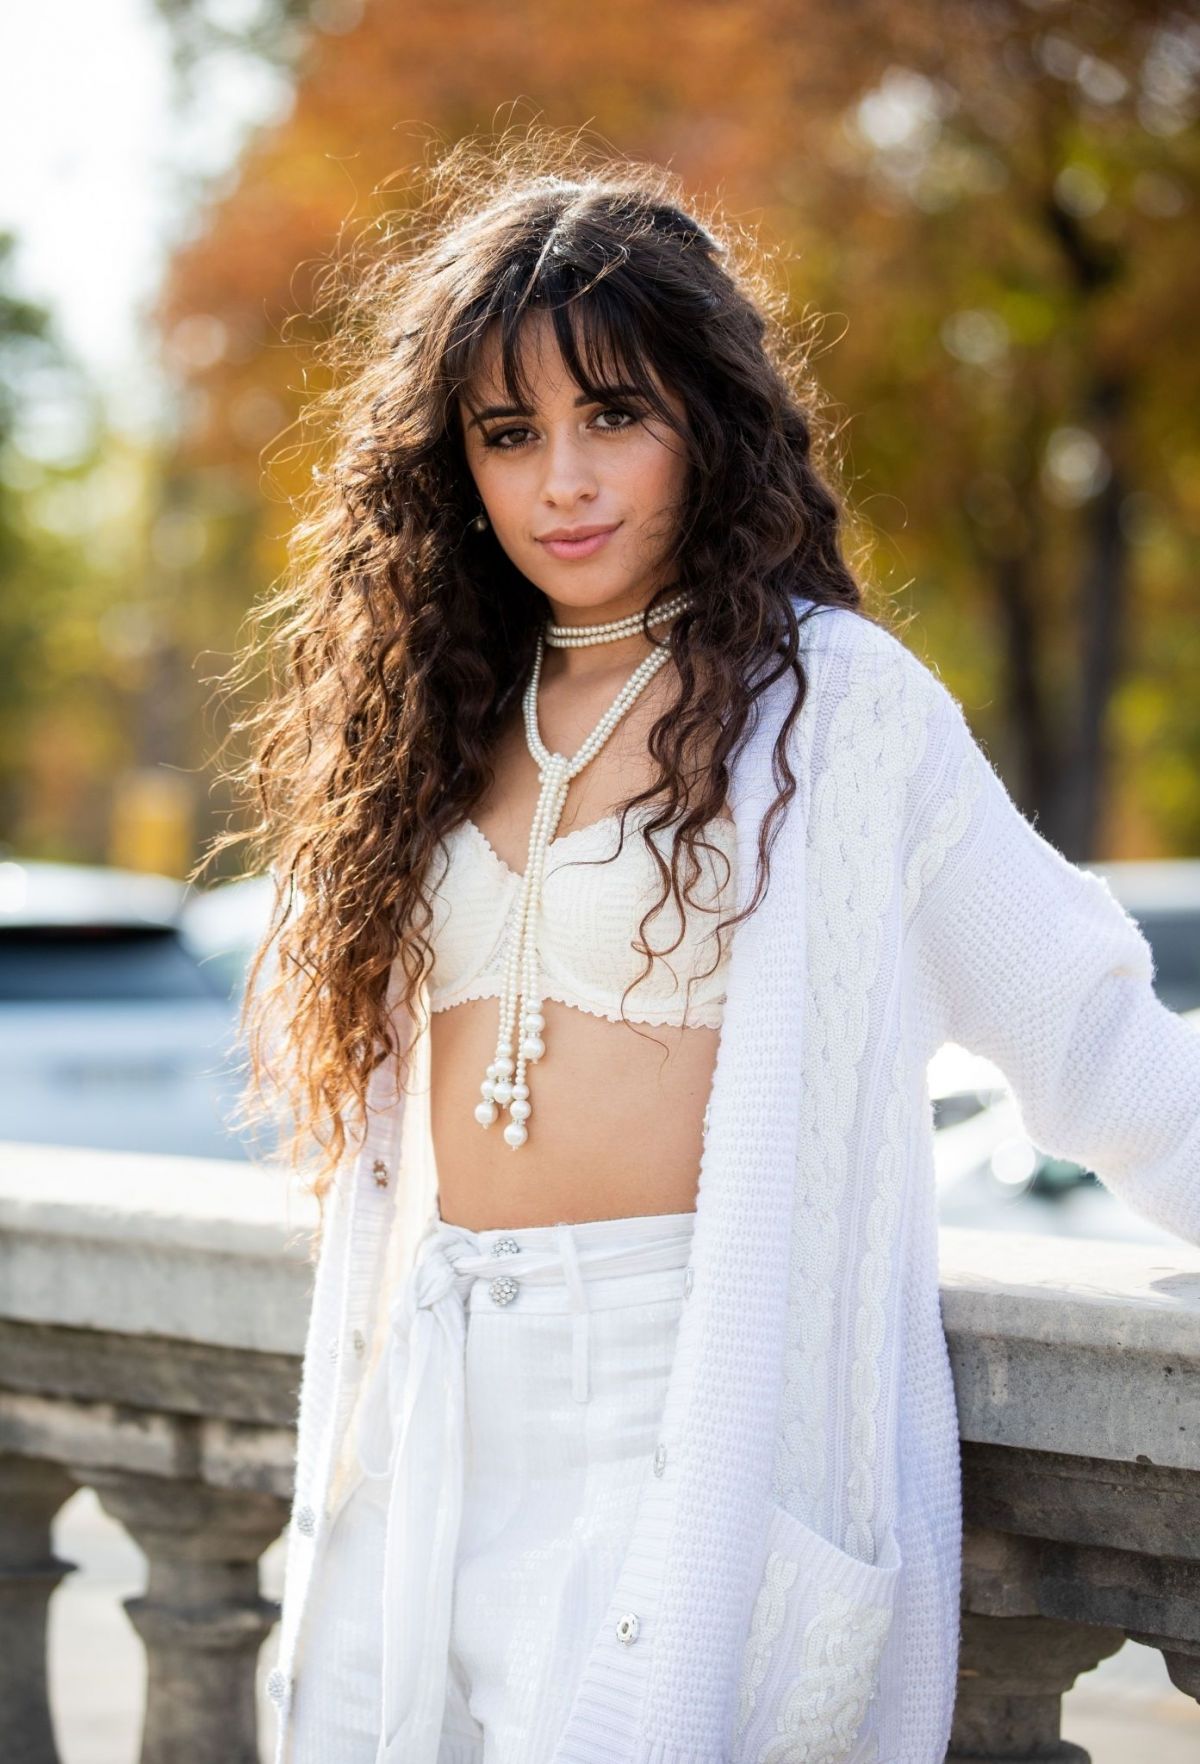 Interesting Facts About Camila Cabello